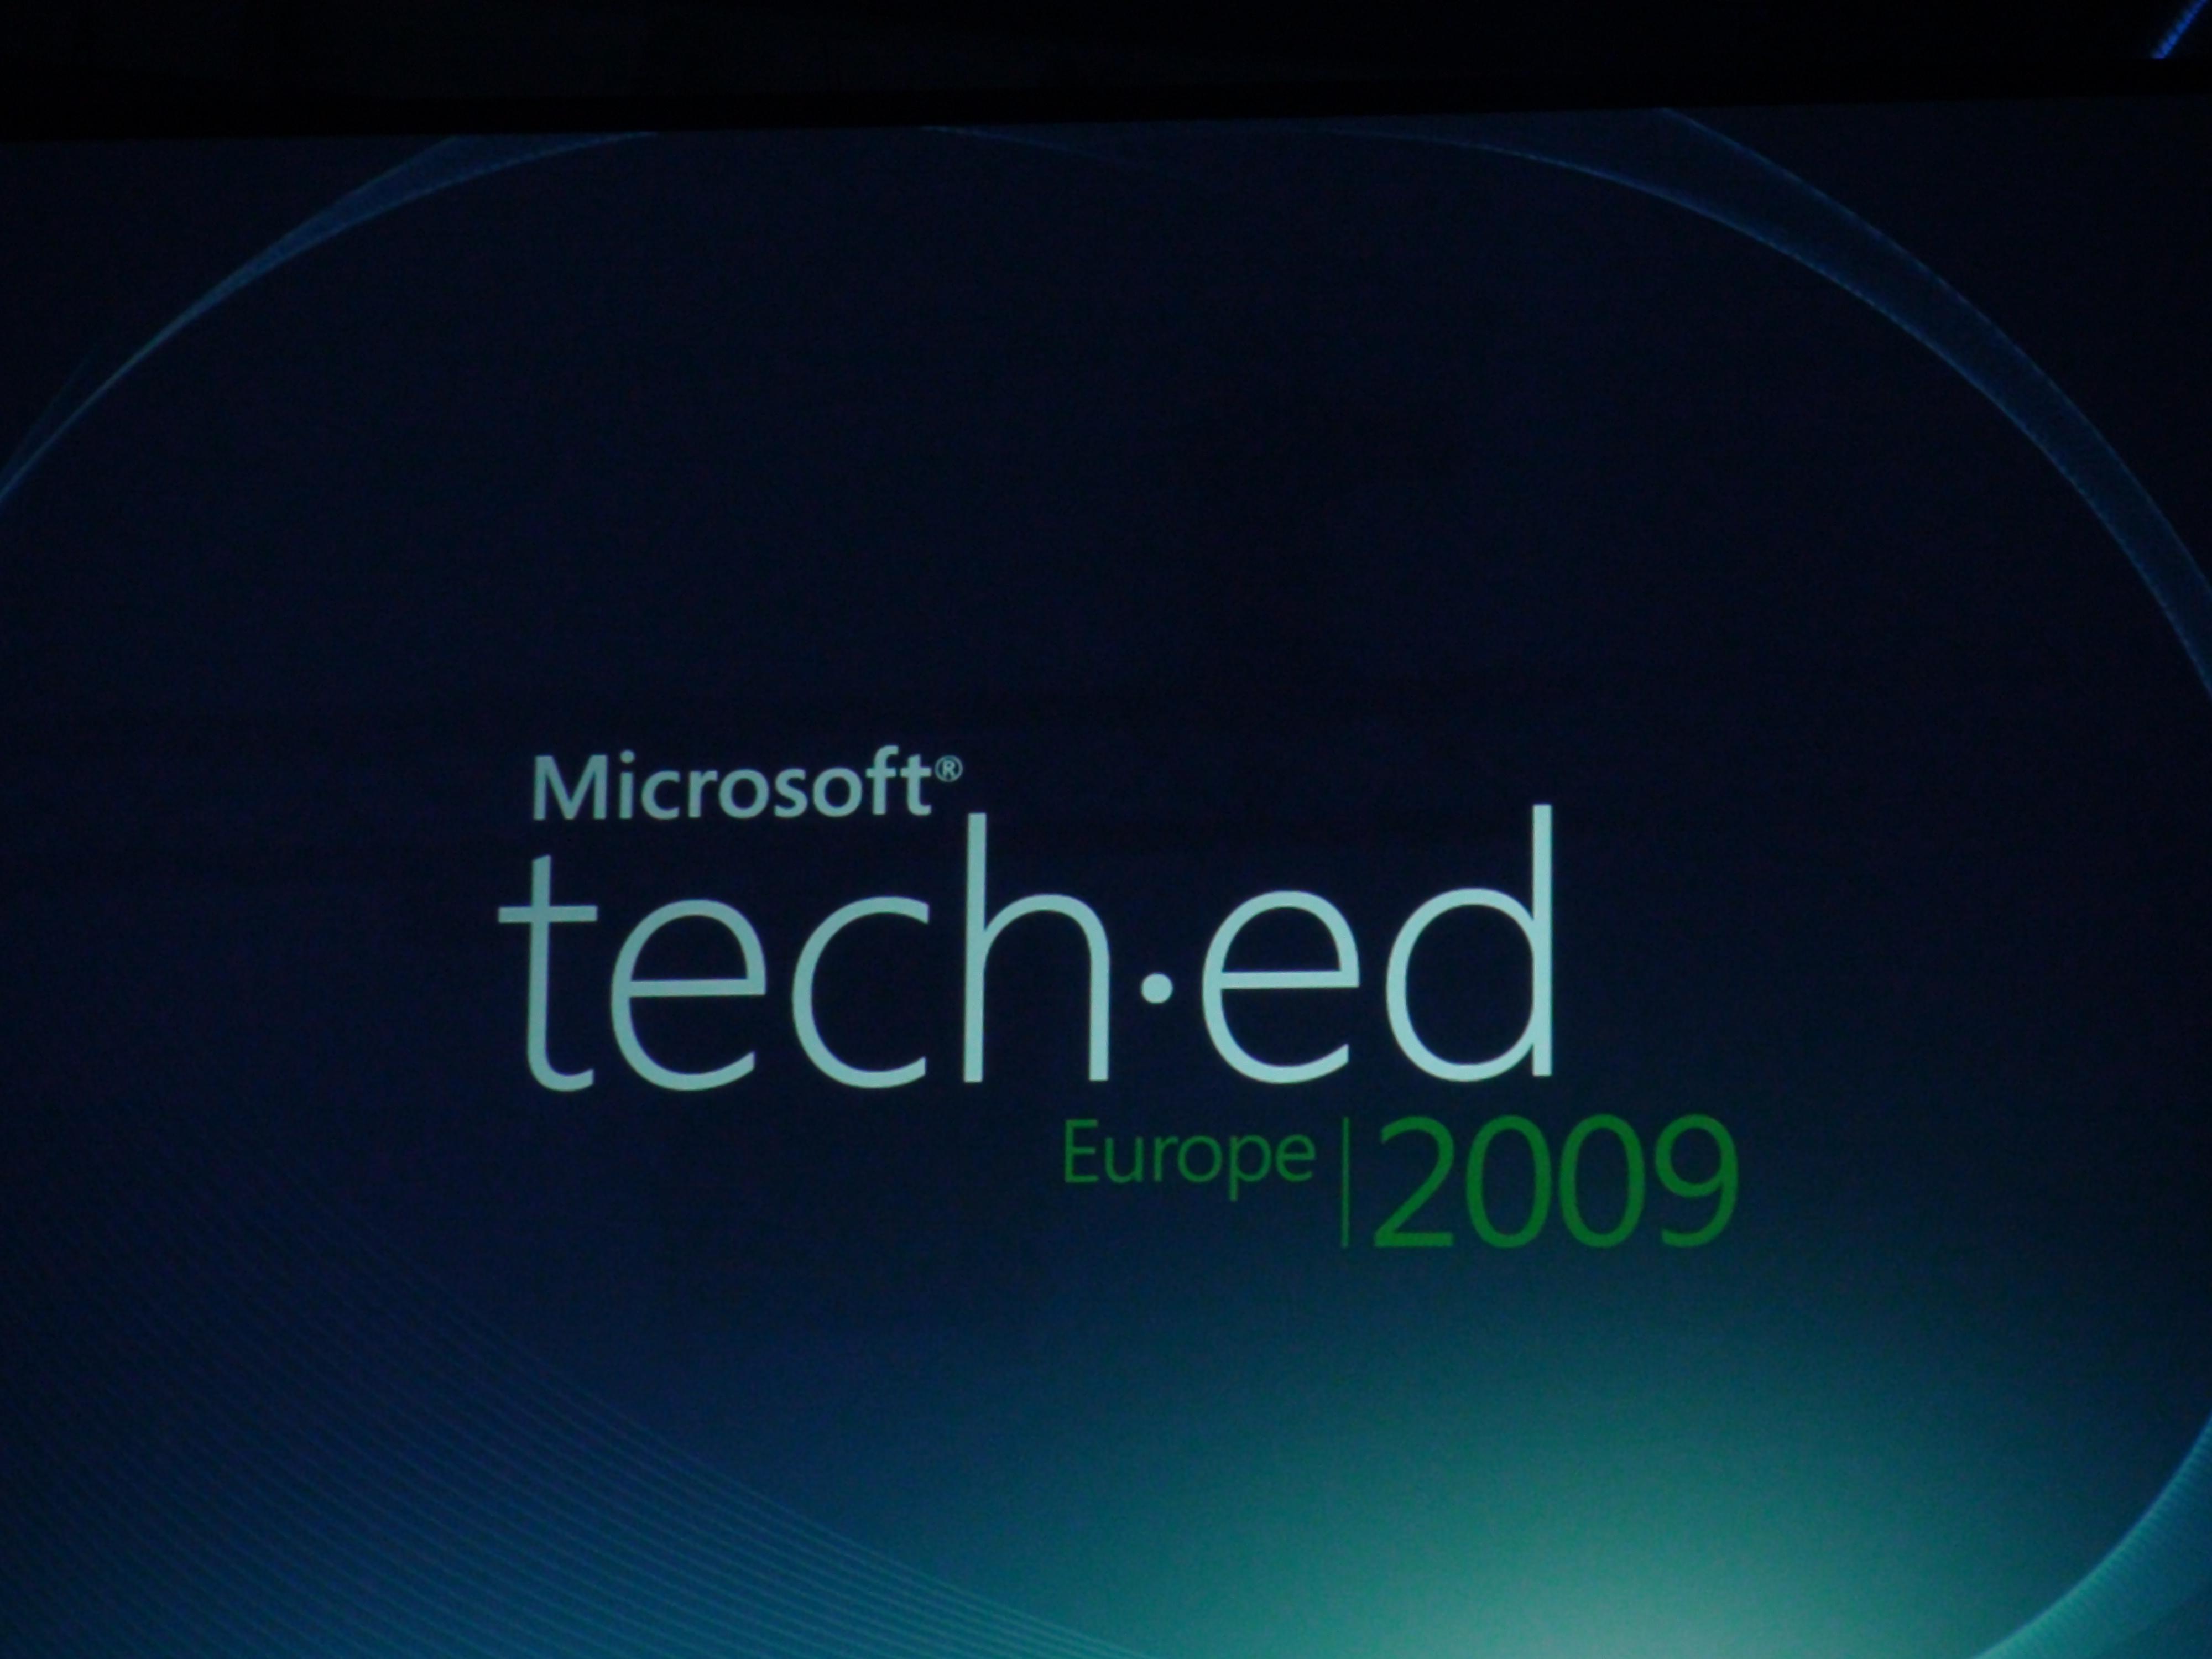 teched_2009_keynote_TechEd_logo